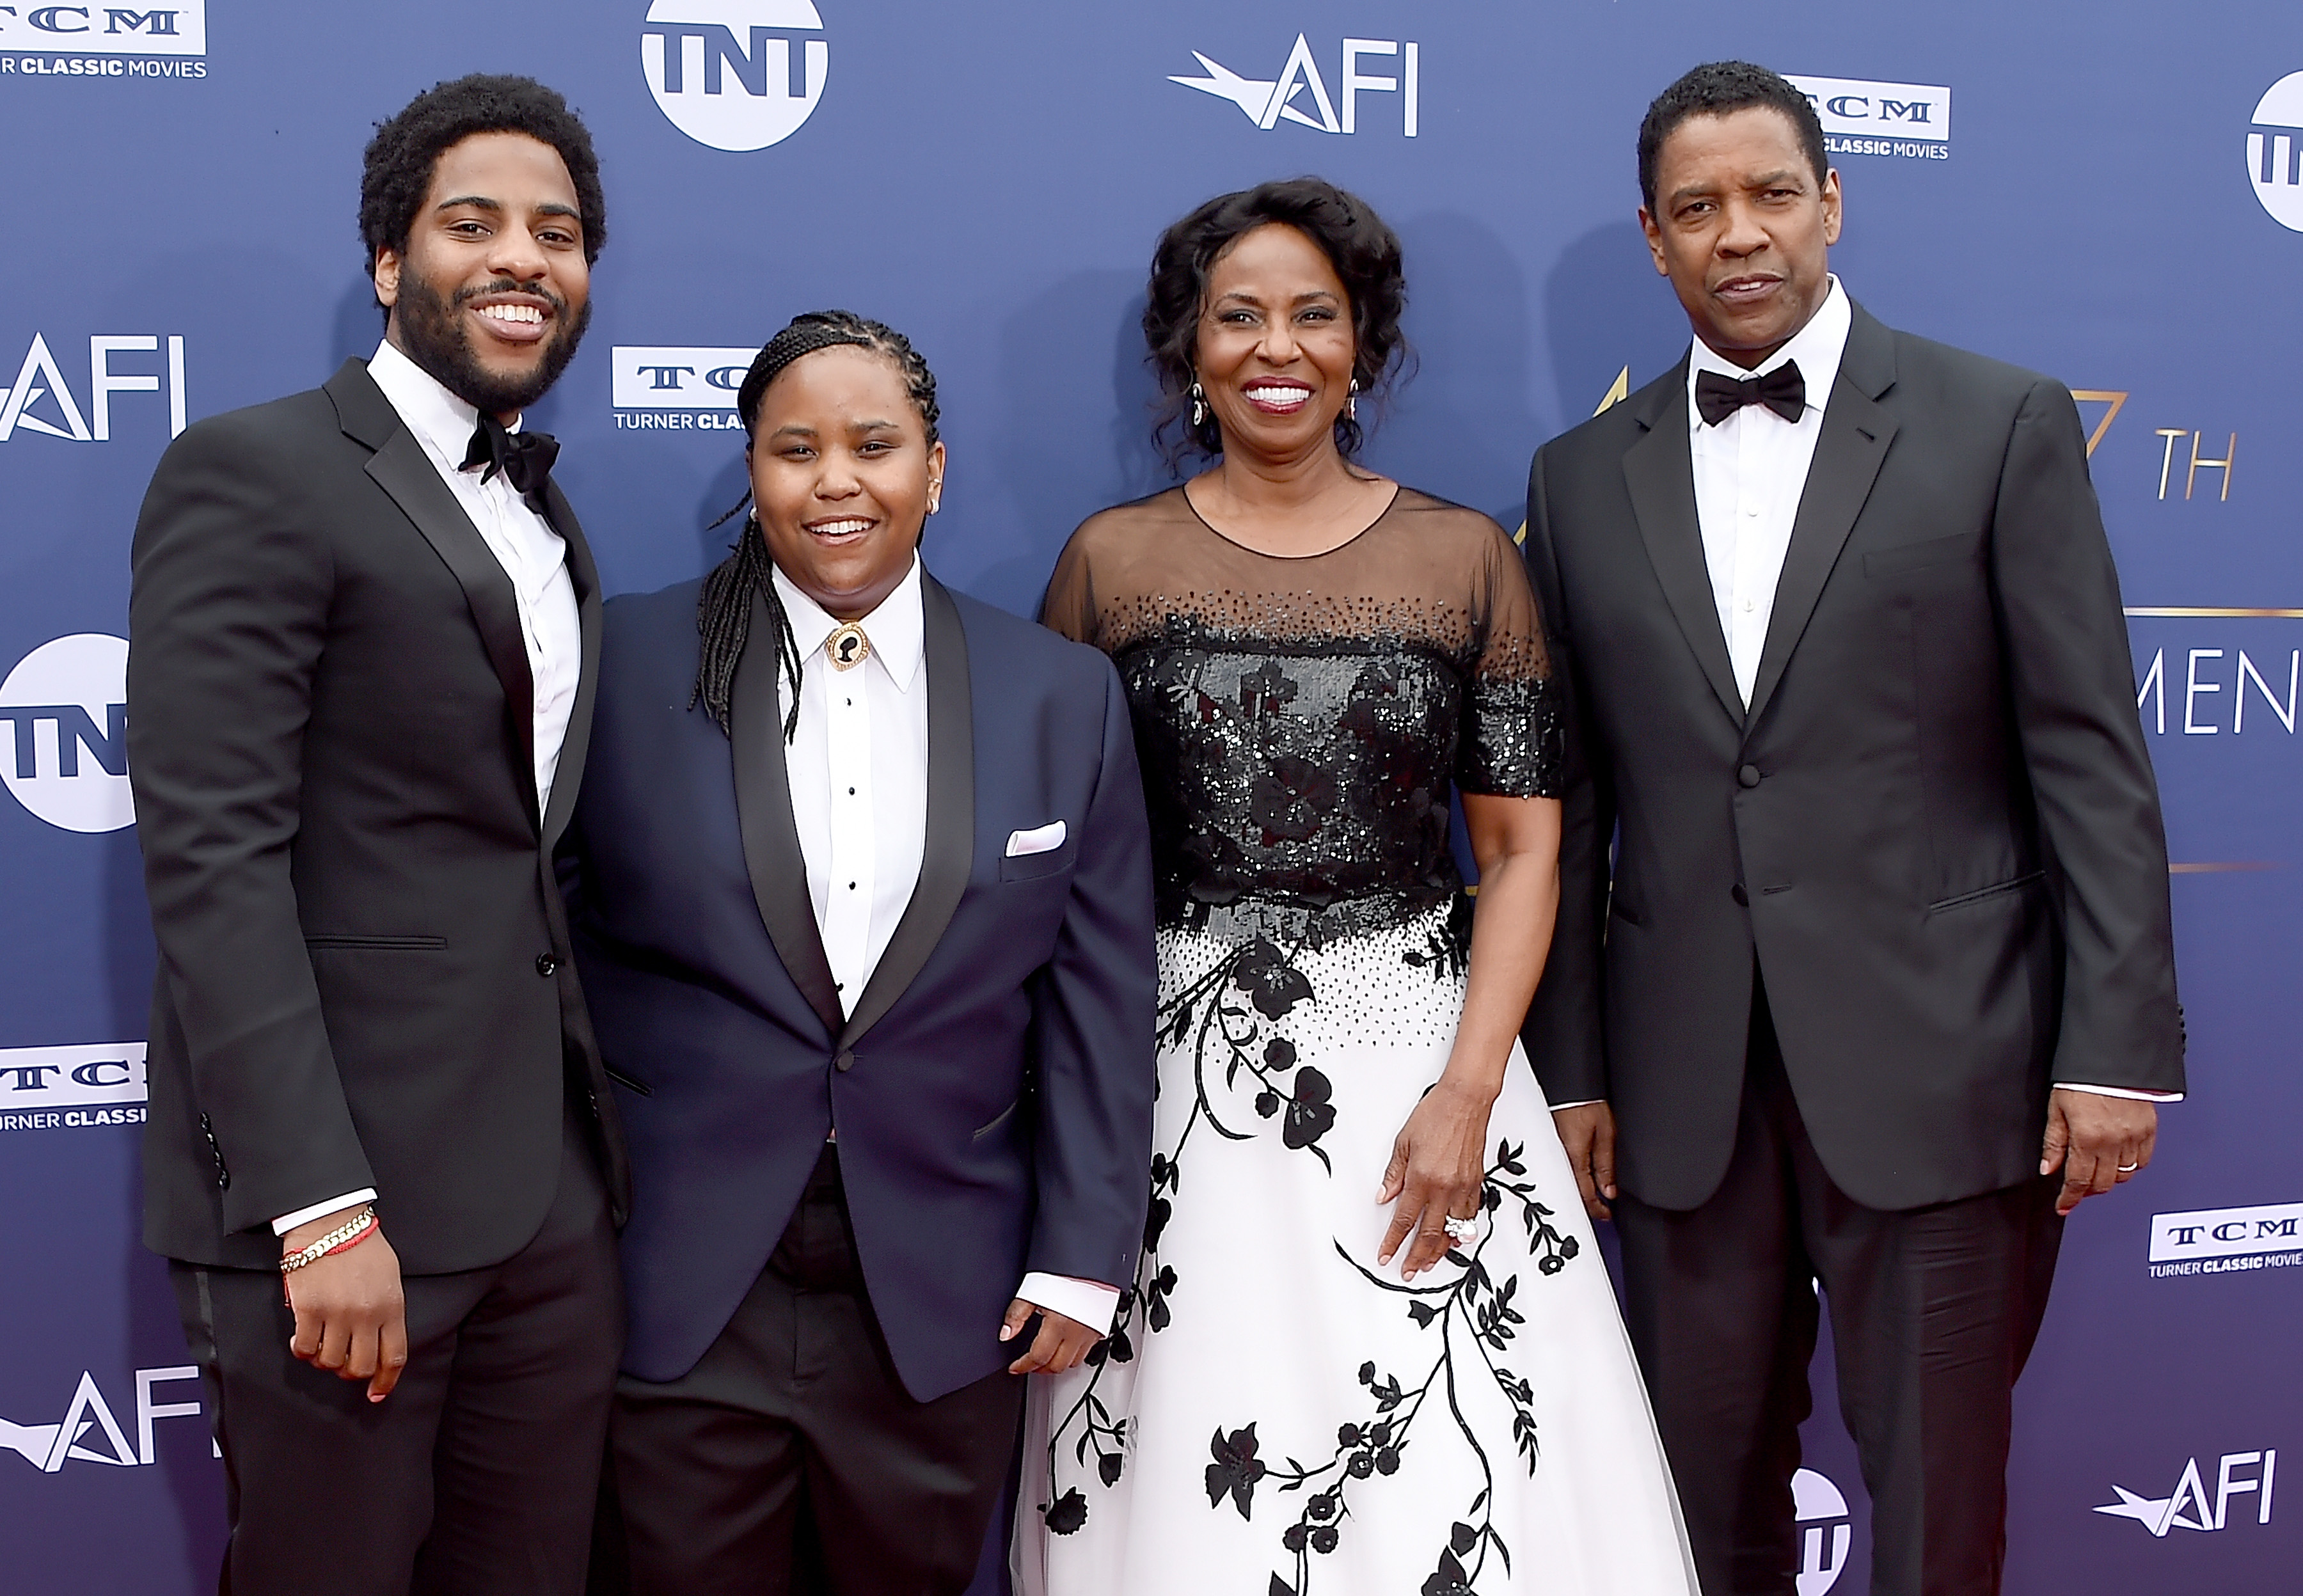 Malcolm, Katia, Pauletta, and Denzel Washington at the American Film Institute's 47th Life Achievement Award Gala in Hollywood, California on June 6, 2019 | Source: Getty Images